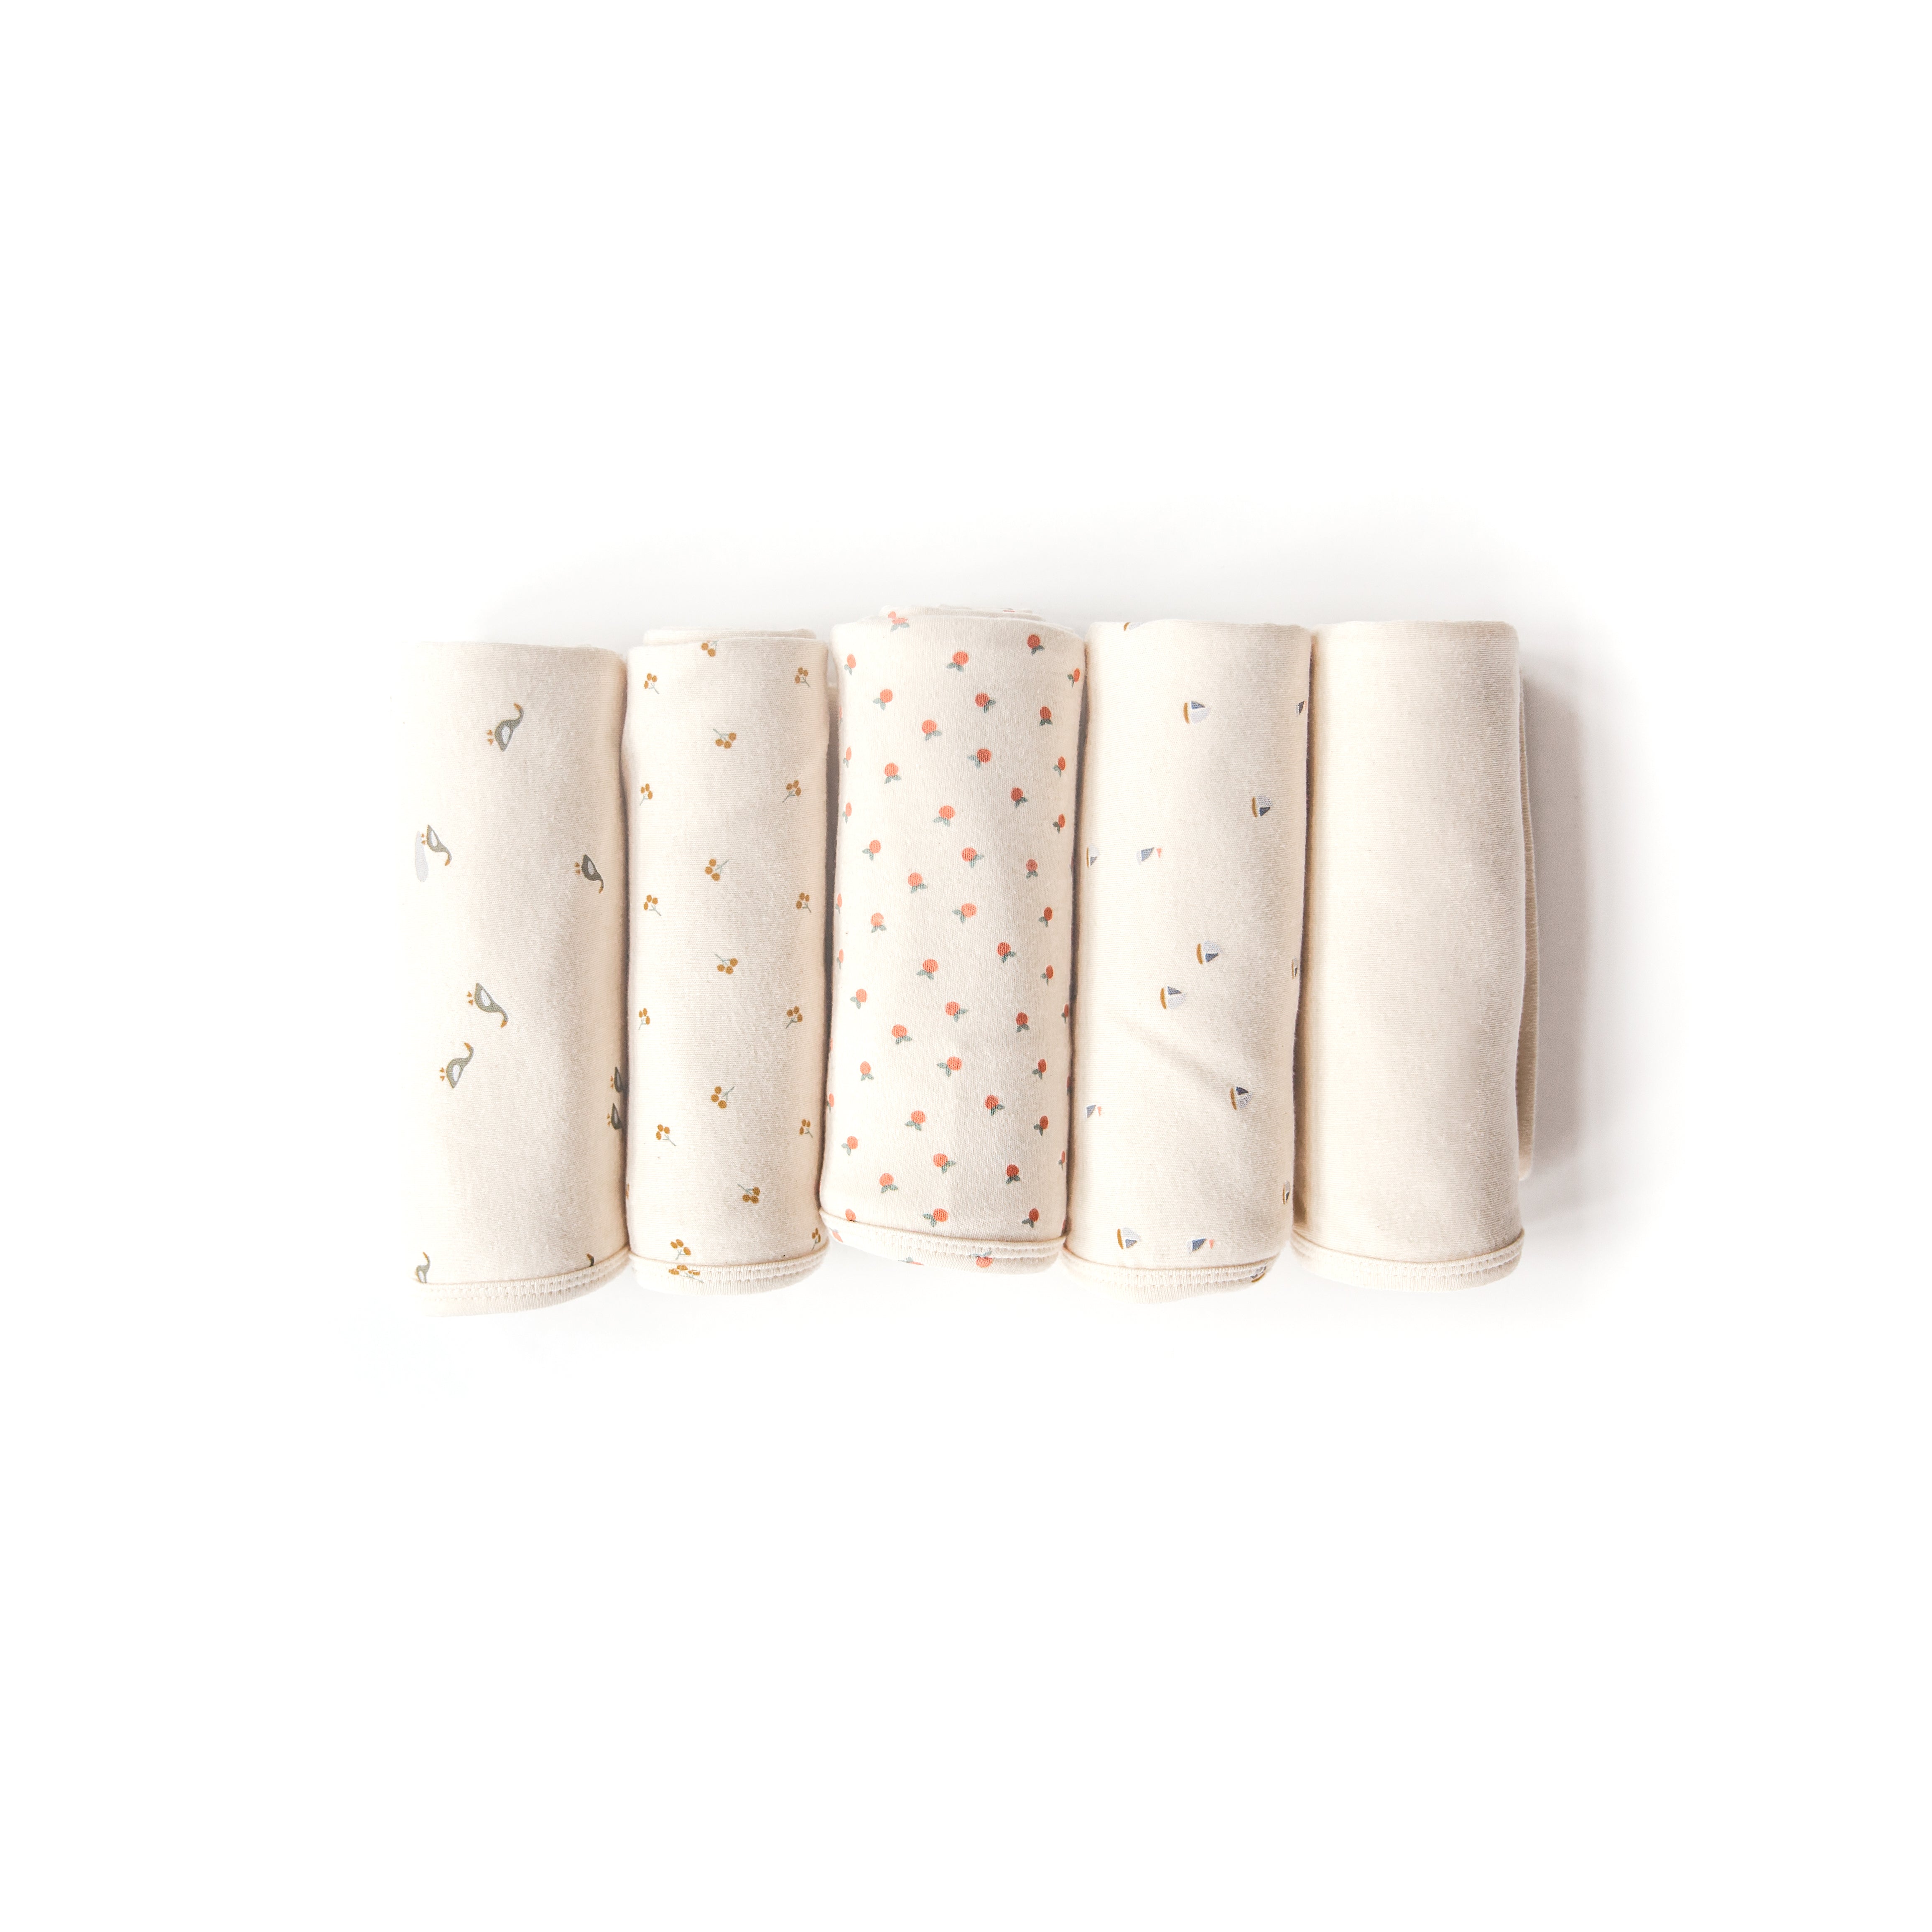 Oolie organic baby blankets in five different graphic prints, gently rolled on a white background.